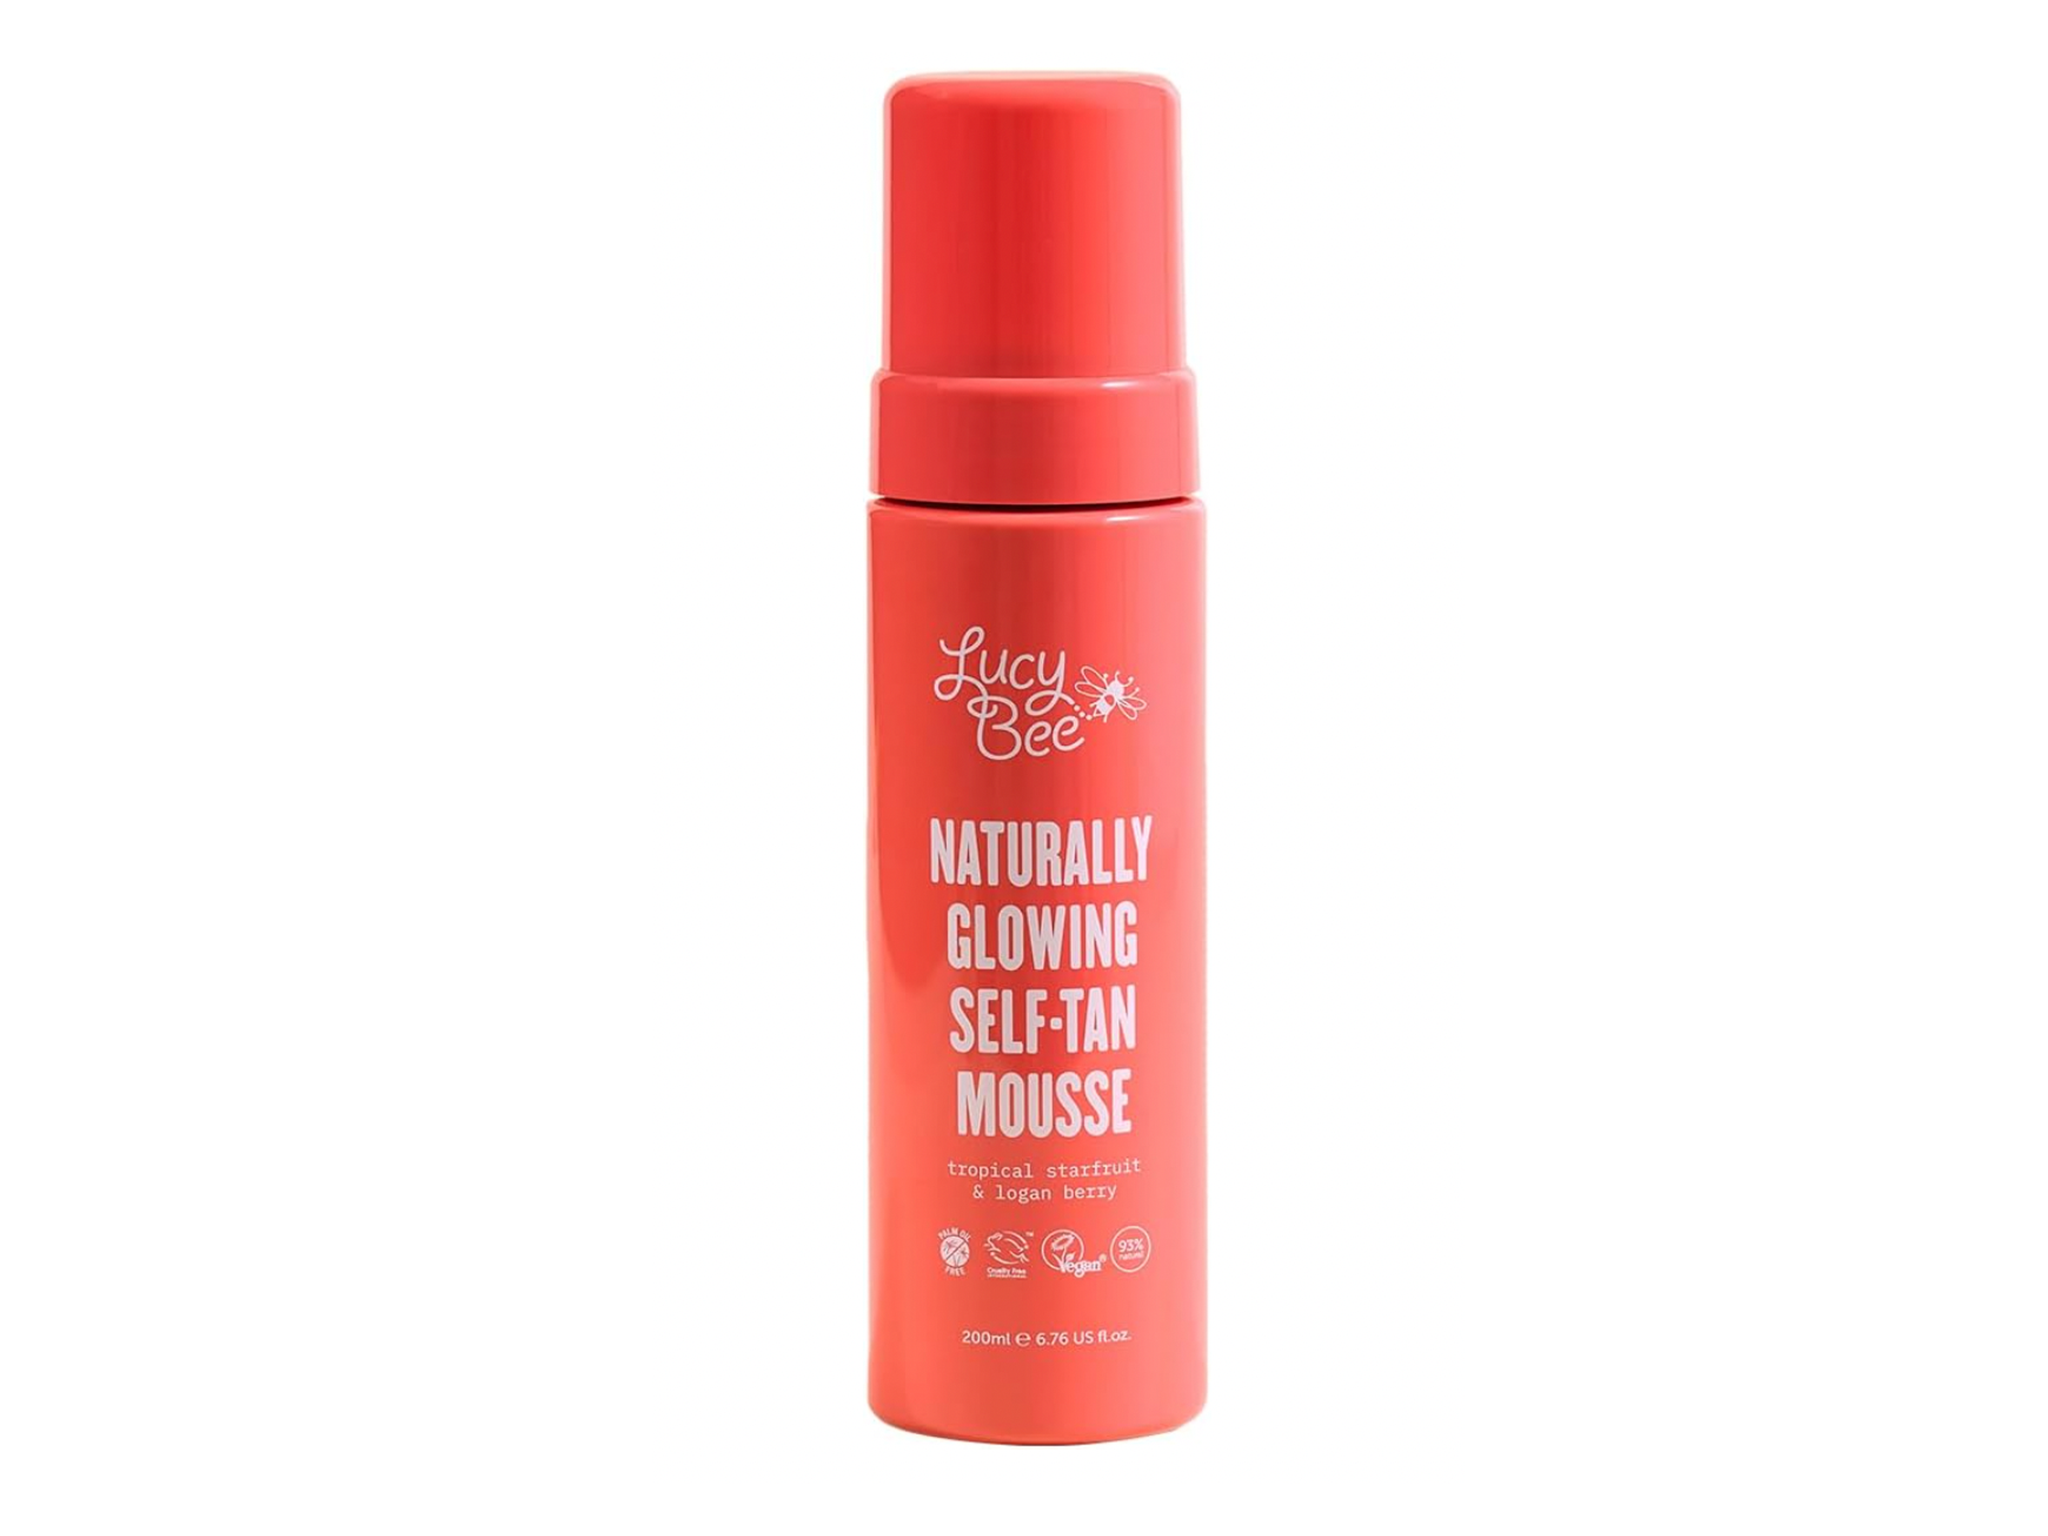 Lucy Bee naturally glowing self-tan mousse